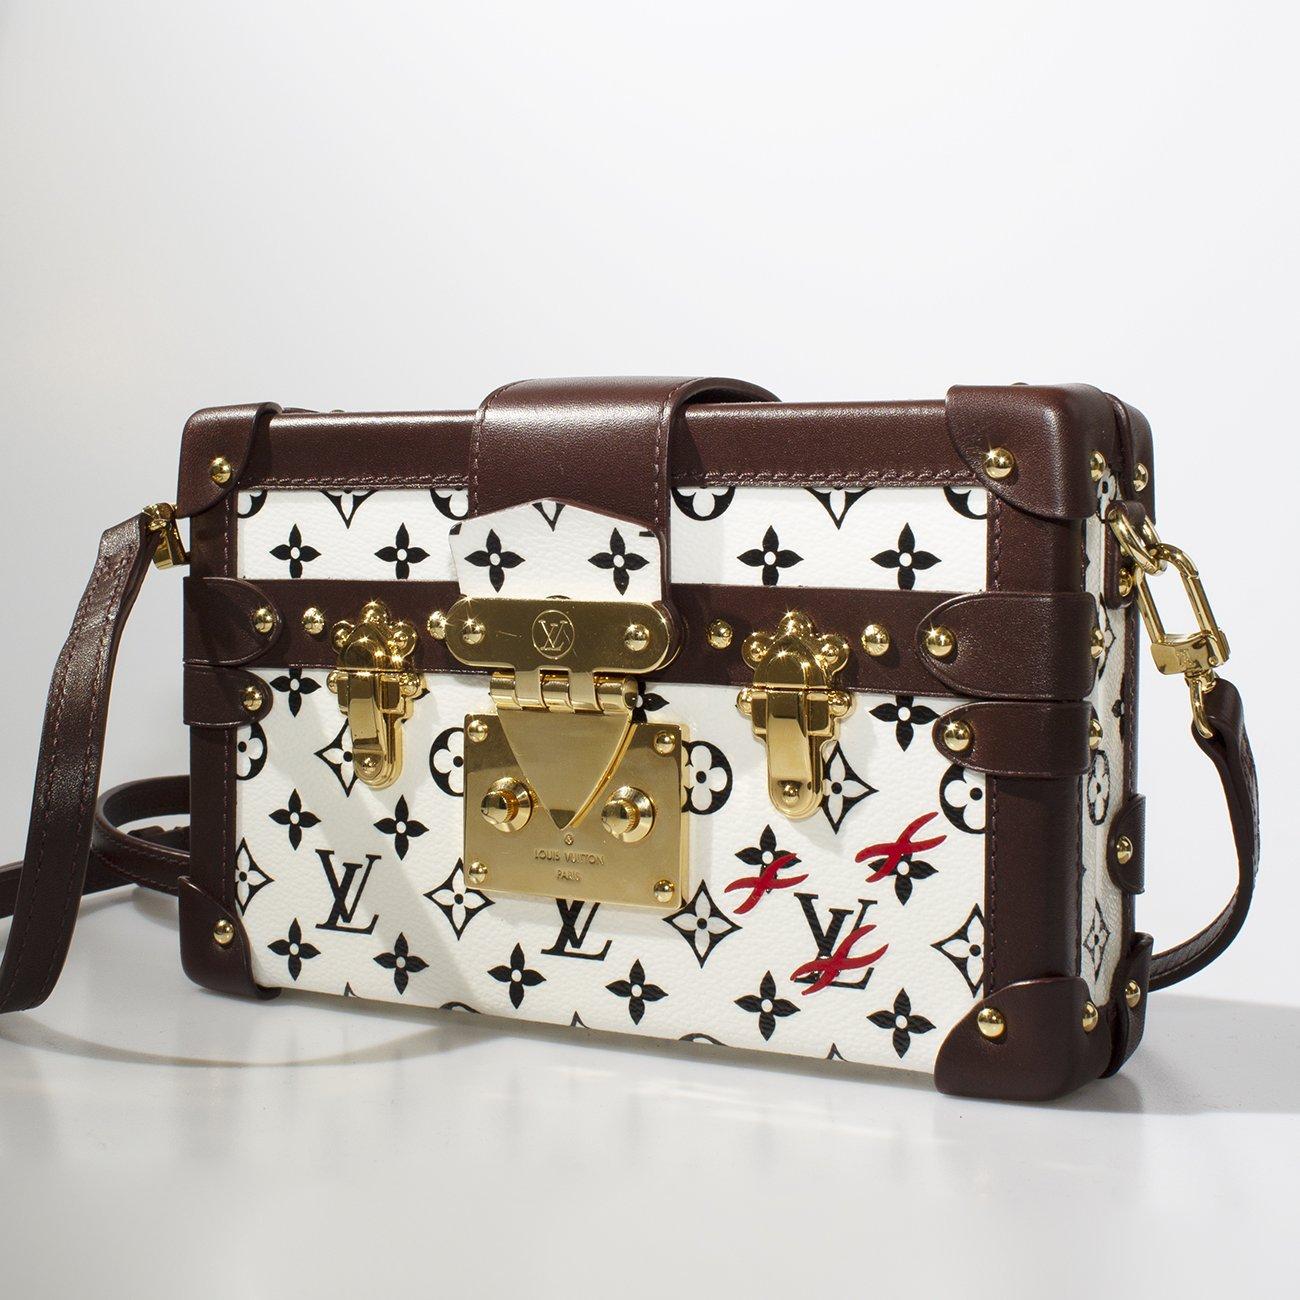 Louis Vuitton Black and White Monogram Petite Malle 
Spring/Summer 2016
White toile canvas with black monogram 
Dark brown leather trim
Decorative brass buckles and press lock
Magnetic opening halves
Length: 7.5